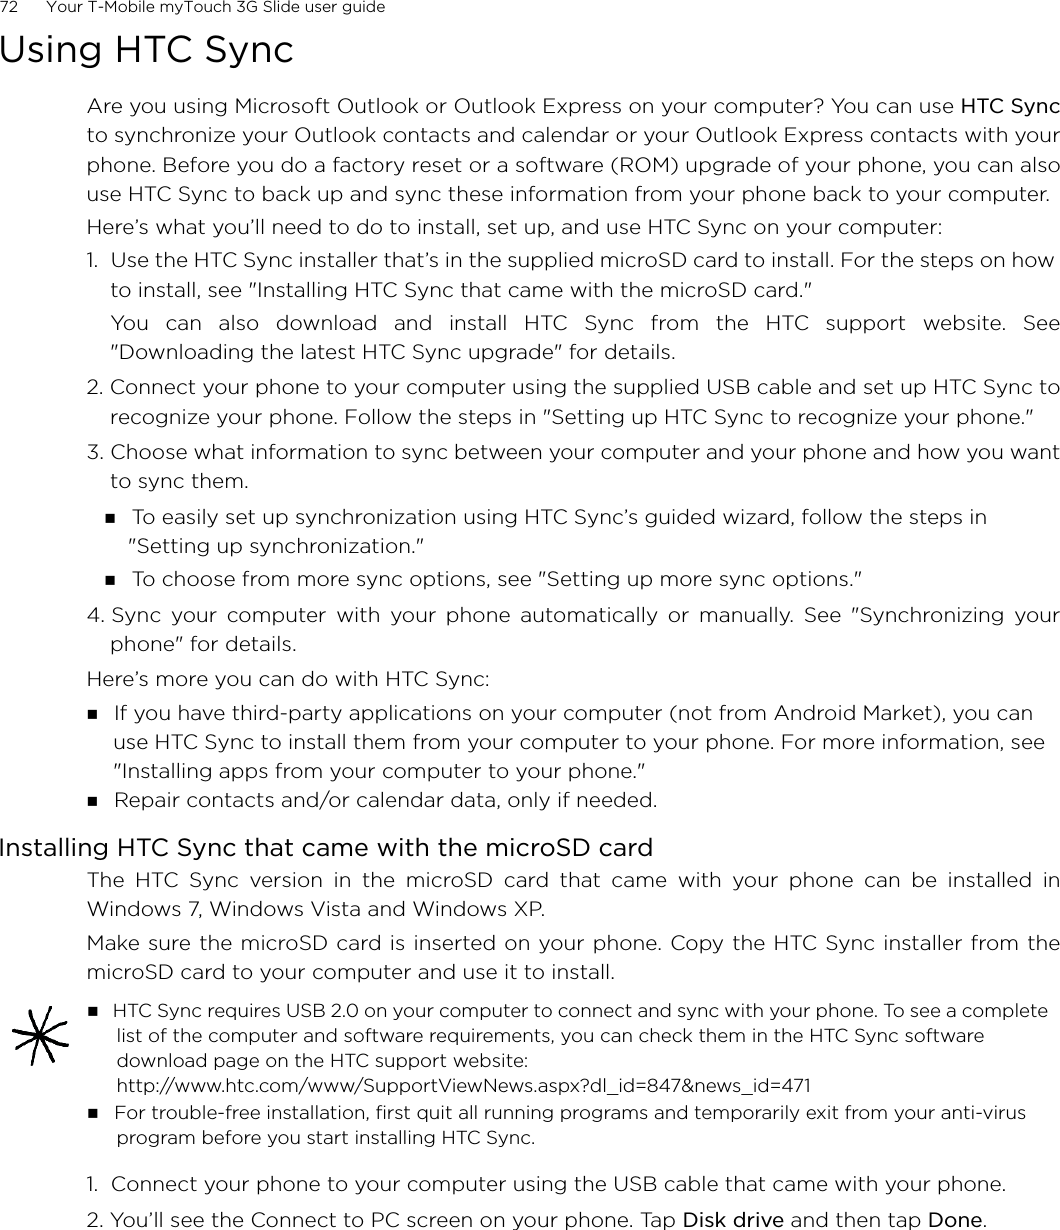 72      Your T-Mobile myTouch 3G Slide user guide Using HTC SyncAre you using Microsoft Outlook or Outlook Express on your computer? You can use HTC Syncto synchronize your Outlook contacts and calendar or your Outlook Express contacts with yourphone. Before you do a factory reset or a software (ROM) upgrade of your phone, you can alsouse HTC Sync to back up and sync these information from your phone back to your computer.Here’s what you’ll need to do to install, set up, and use HTC Sync on your computer:1.  Use the HTC Sync installer that’s in the supplied microSD card to install. For the steps on how to install, see &quot;Installing HTC Sync that came with the microSD card.&quot;You can also download and install HTC Sync from the HTC support website. See&quot;Downloading the latest HTC Sync upgrade&quot; for details.2. Connect your phone to your computer using the supplied USB cable and set up HTC Sync torecognize your phone. Follow the steps in &quot;Setting up HTC Sync to recognize your phone.&quot;3. Choose what information to sync between your computer and your phone and how you wantto sync them. To easily set up synchronization using HTC Sync’s guided wizard, follow the steps in &quot;Setting up synchronization.&quot; To choose from more sync options, see &quot;Setting up more sync options.&quot;4. Sync your computer with your phone automatically or manually. See &quot;Synchronizing yourphone&quot; for details.Here’s more you can do with HTC Sync: If you have third-party applications on your computer (not from Android Market), you can use HTC Sync to install them from your computer to your phone. For more information, see &quot;Installing apps from your computer to your phone.&quot; Repair contacts and/or calendar data, only if needed.Installing HTC Sync that came with the microSD cardThe HTC Sync version in the microSD card that came with your phone can be installed inWindows 7, Windows Vista and Windows XP.Make sure the microSD card is inserted on your phone. Copy the HTC Sync installer from themicroSD card to your computer and use it to install.1.  Connect your phone to your computer using the USB cable that came with your phone.2. You’ll see the Connect to PC screen on your phone. Tap Disk drive and then tap Done. HTC Sync requires USB 2.0 on your computer to connect and sync with your phone. To see a complete list of the computer and software requirements, you can check them in the HTC Sync software download page on the HTC support website:http://www.htc.com/www/SupportViewNews.aspx?dl_id=847&amp;news_id=471 For trouble-free installation, first quit all running programs and temporarily exit from your anti-virus program before you start installing HTC Sync. 